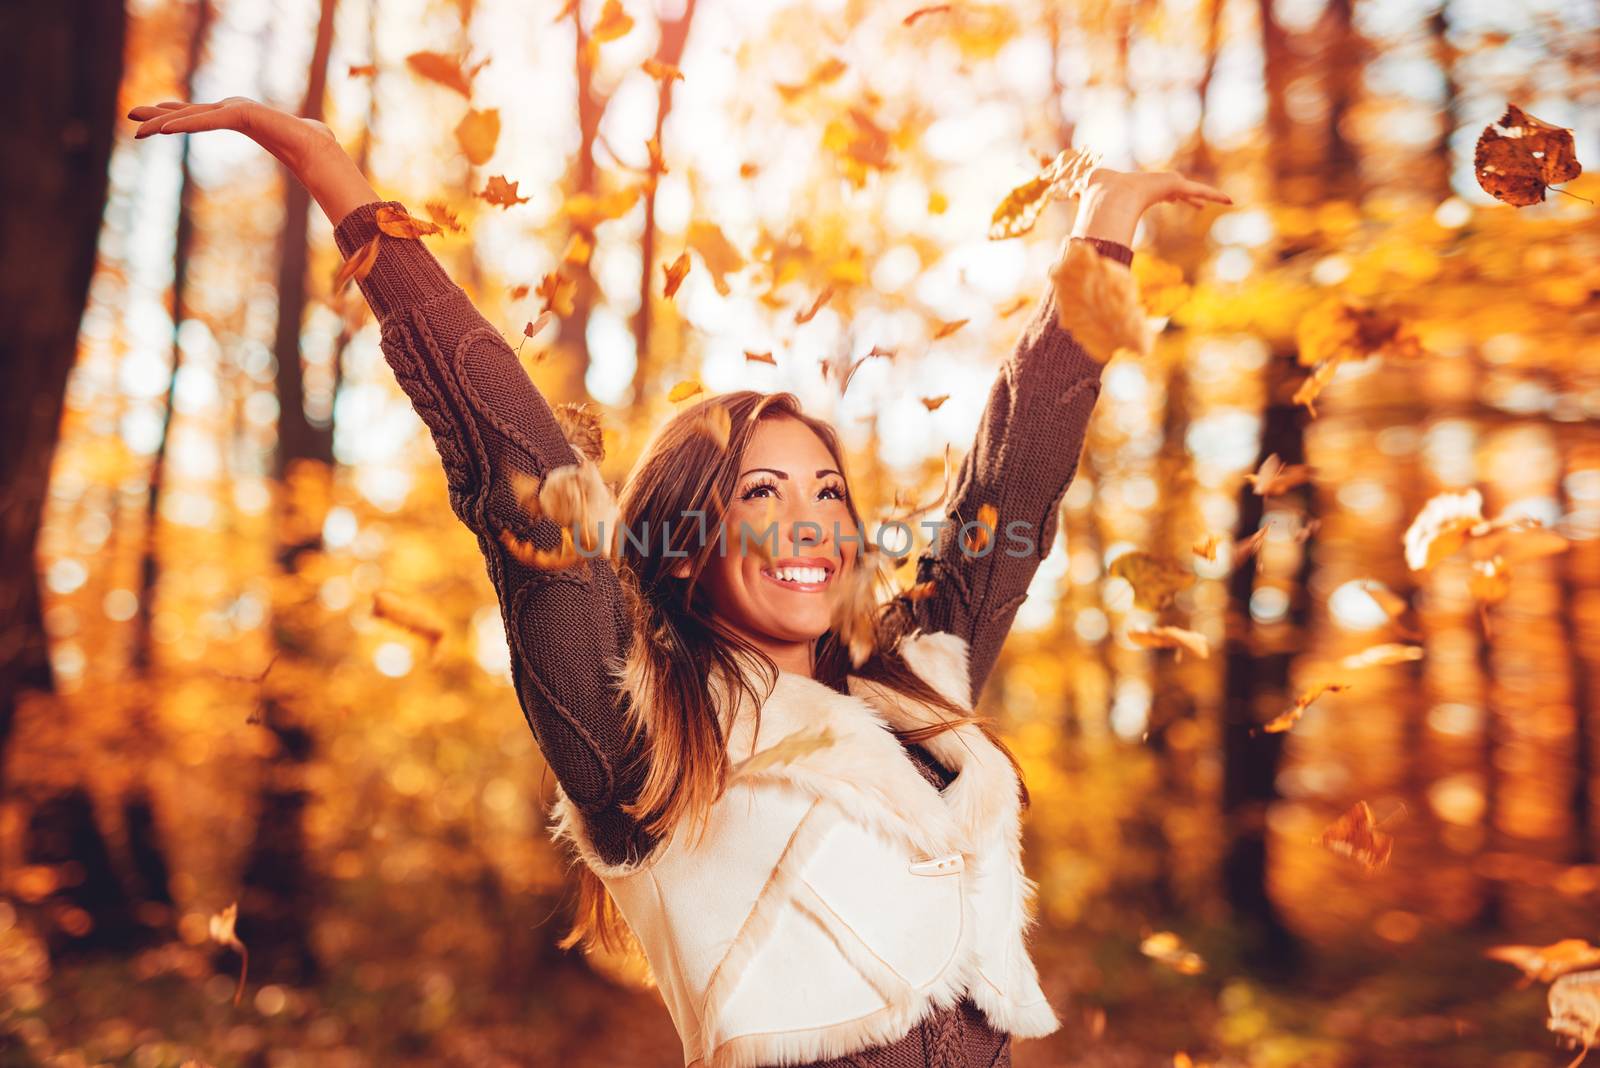 Cheerful young woman having fun in sunny forest in autumn colors.